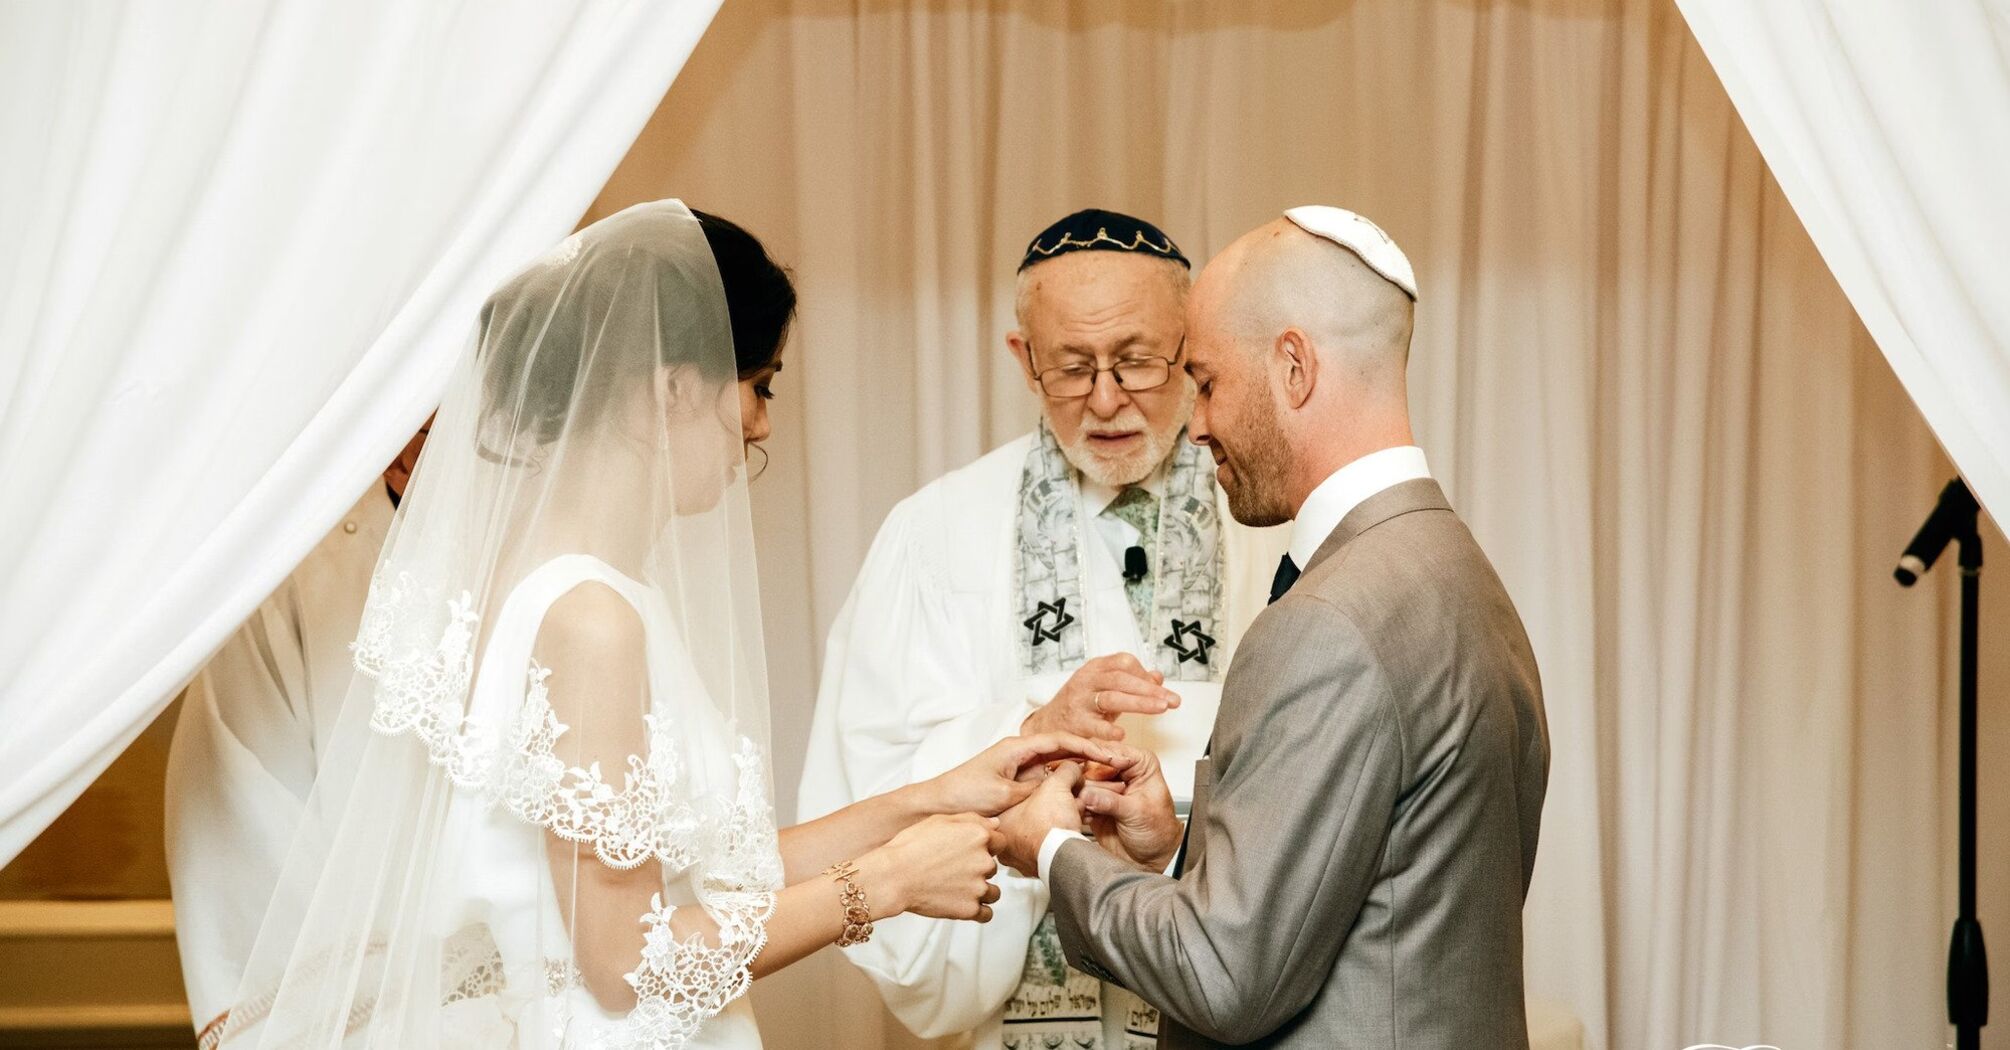 4 tips on what to wear to a Jewish wedding